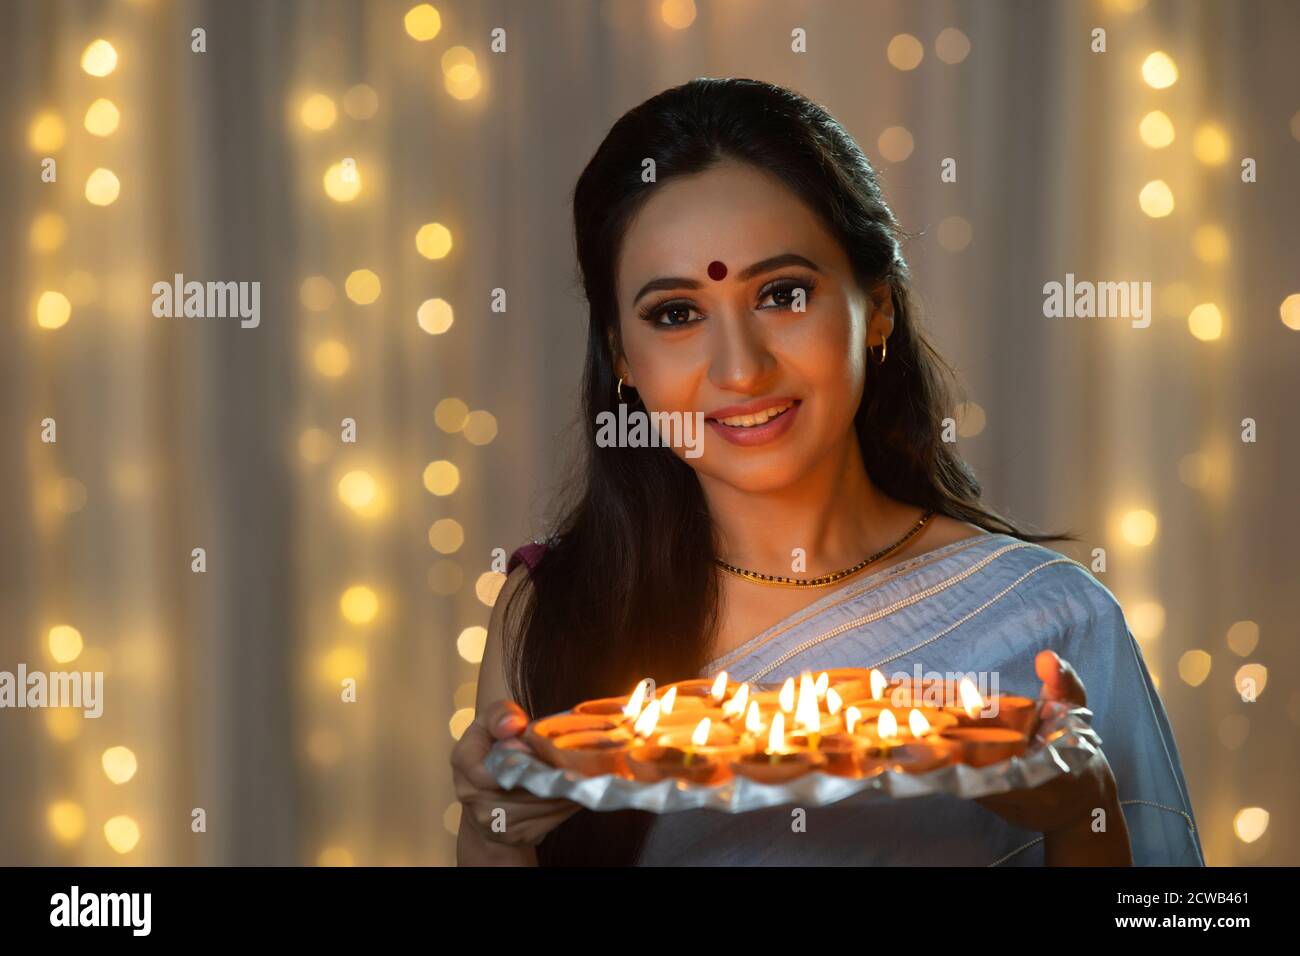 Woman smiling with a plate of diyas in her hand Stock Photo